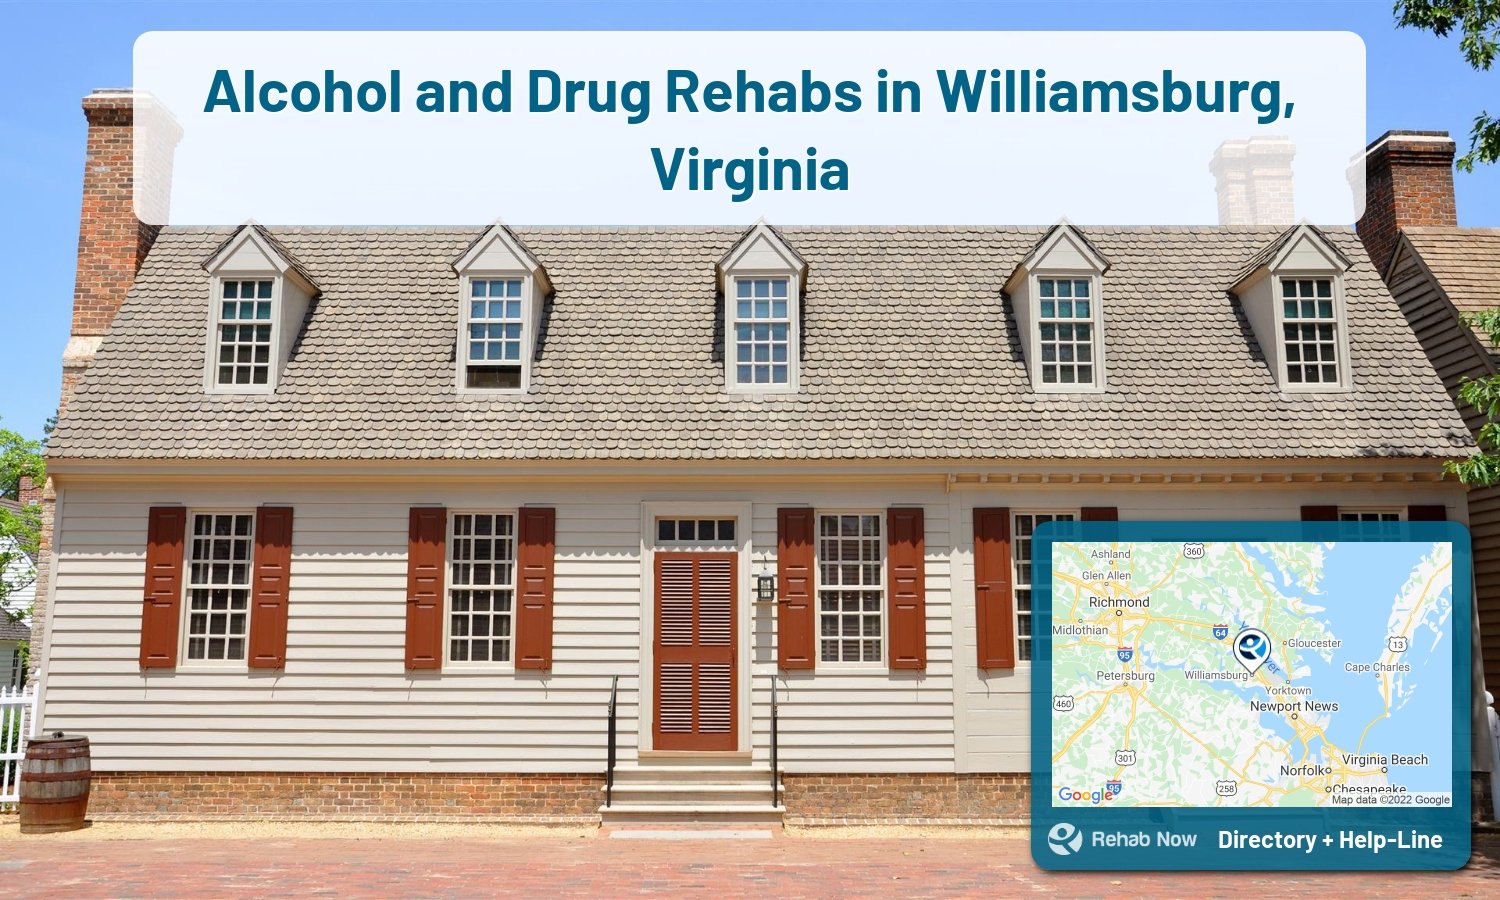 Williamsburg, VA Treatment Centers. Find drug rehab in Williamsburg, Virginia, or detox and treatment programs. Get the right help now!